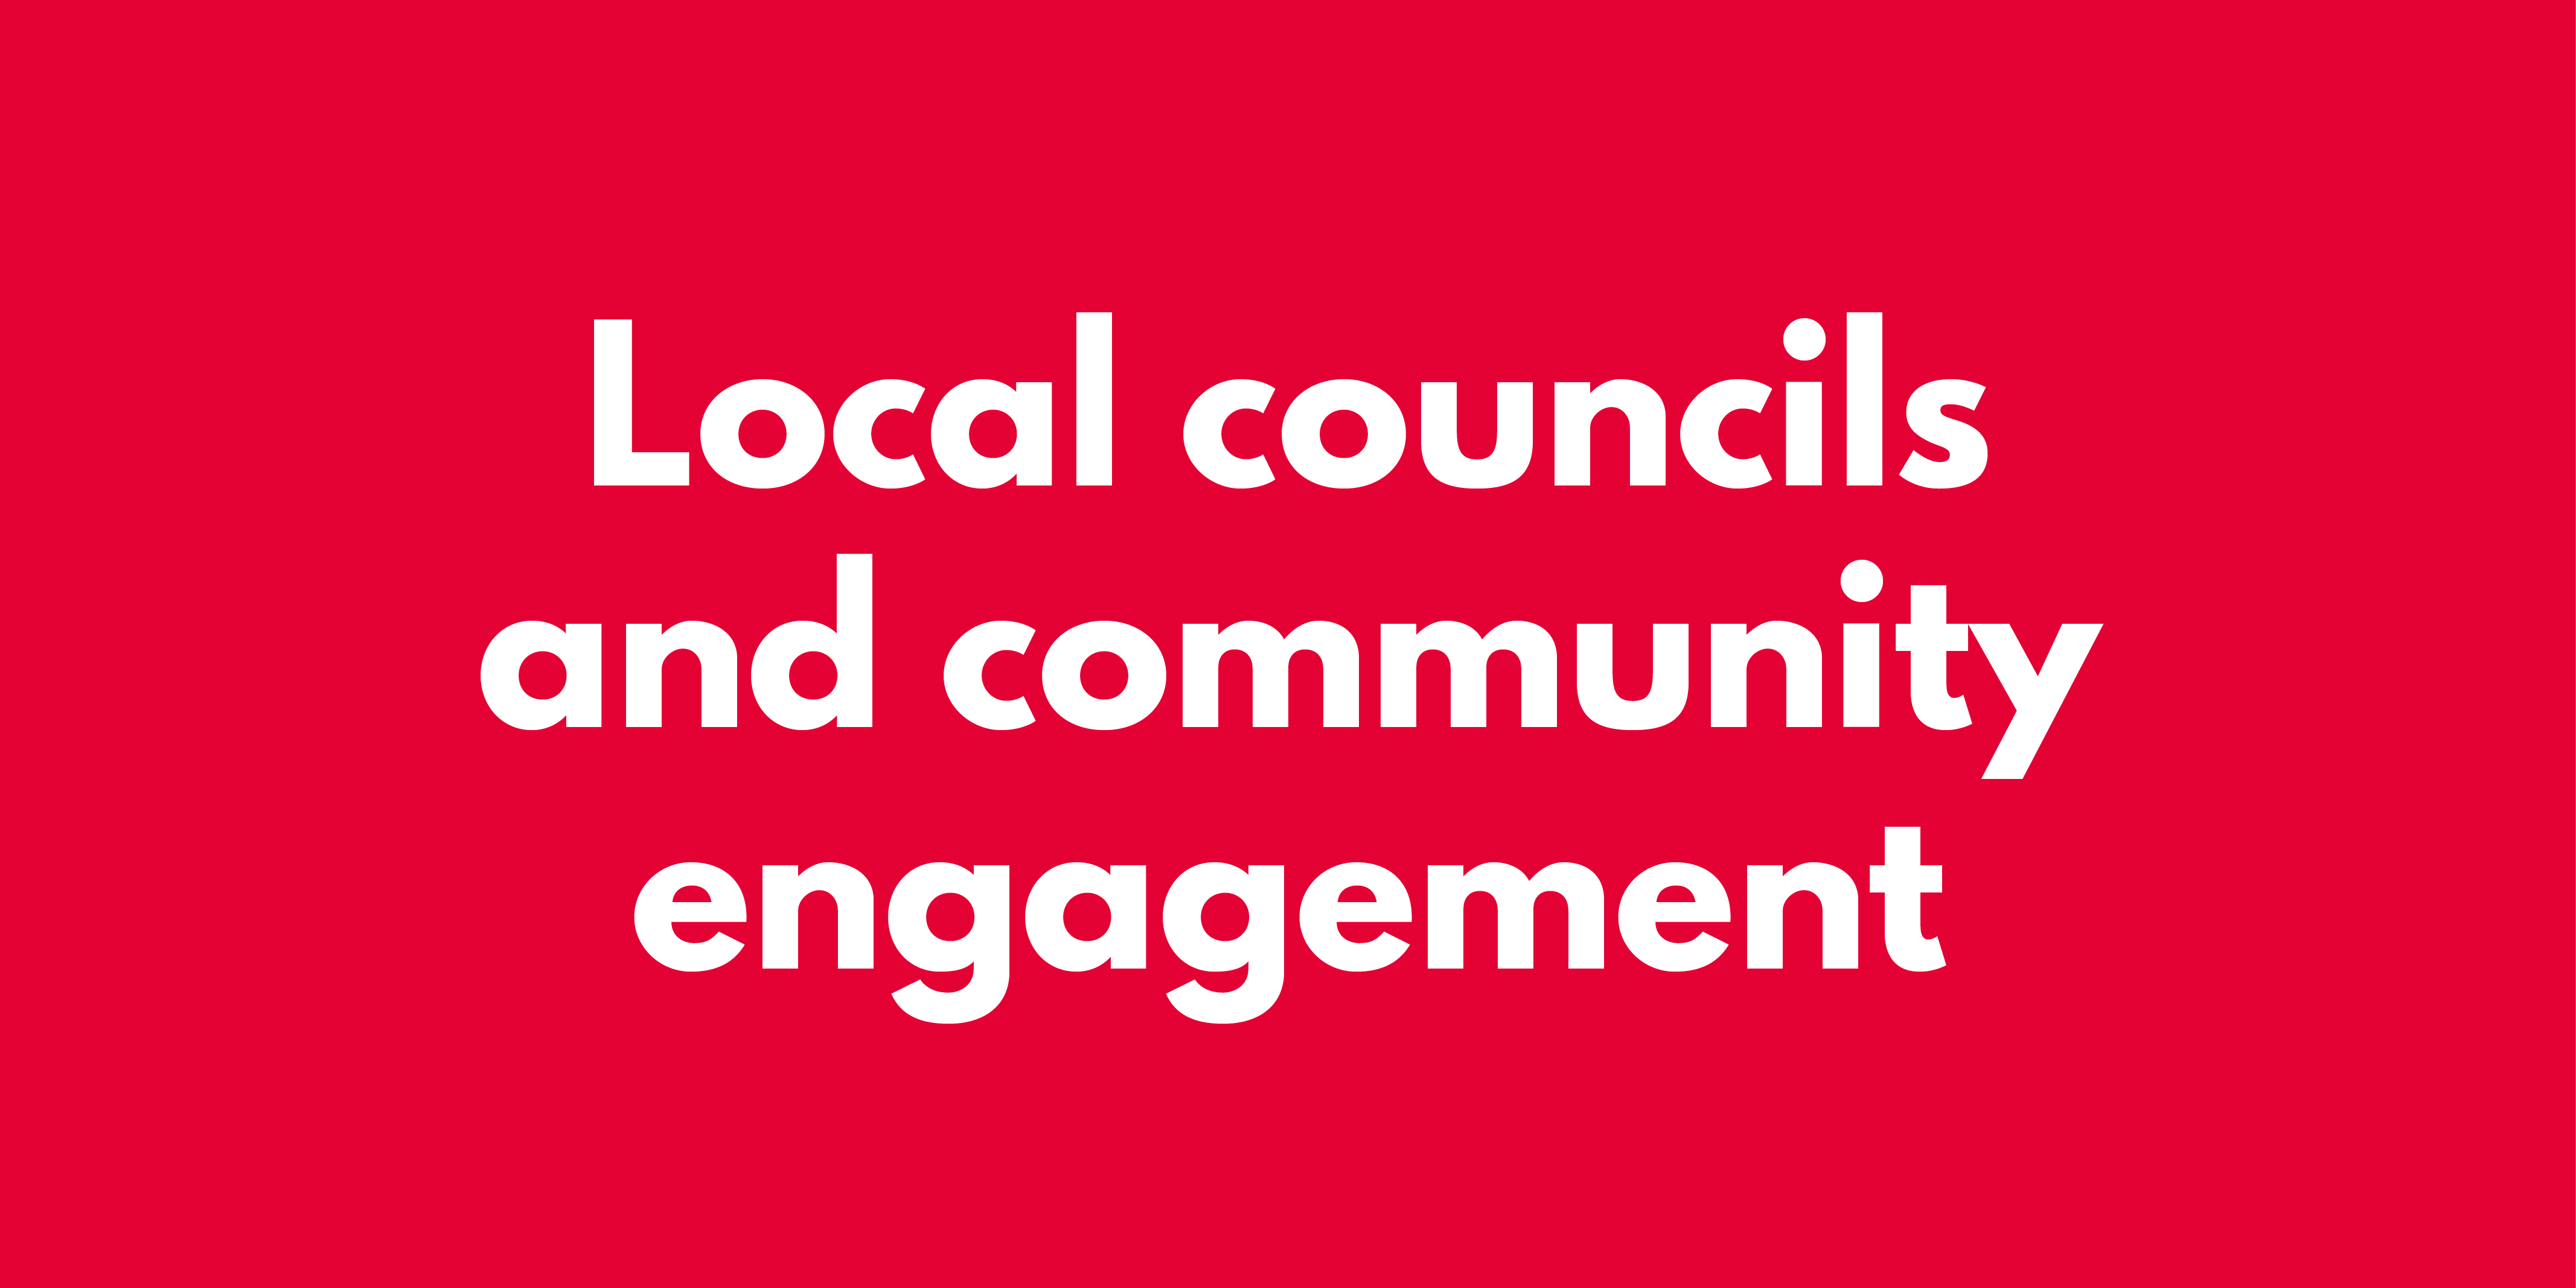 local-councils-and-community-engagemen_20221106-191758_1